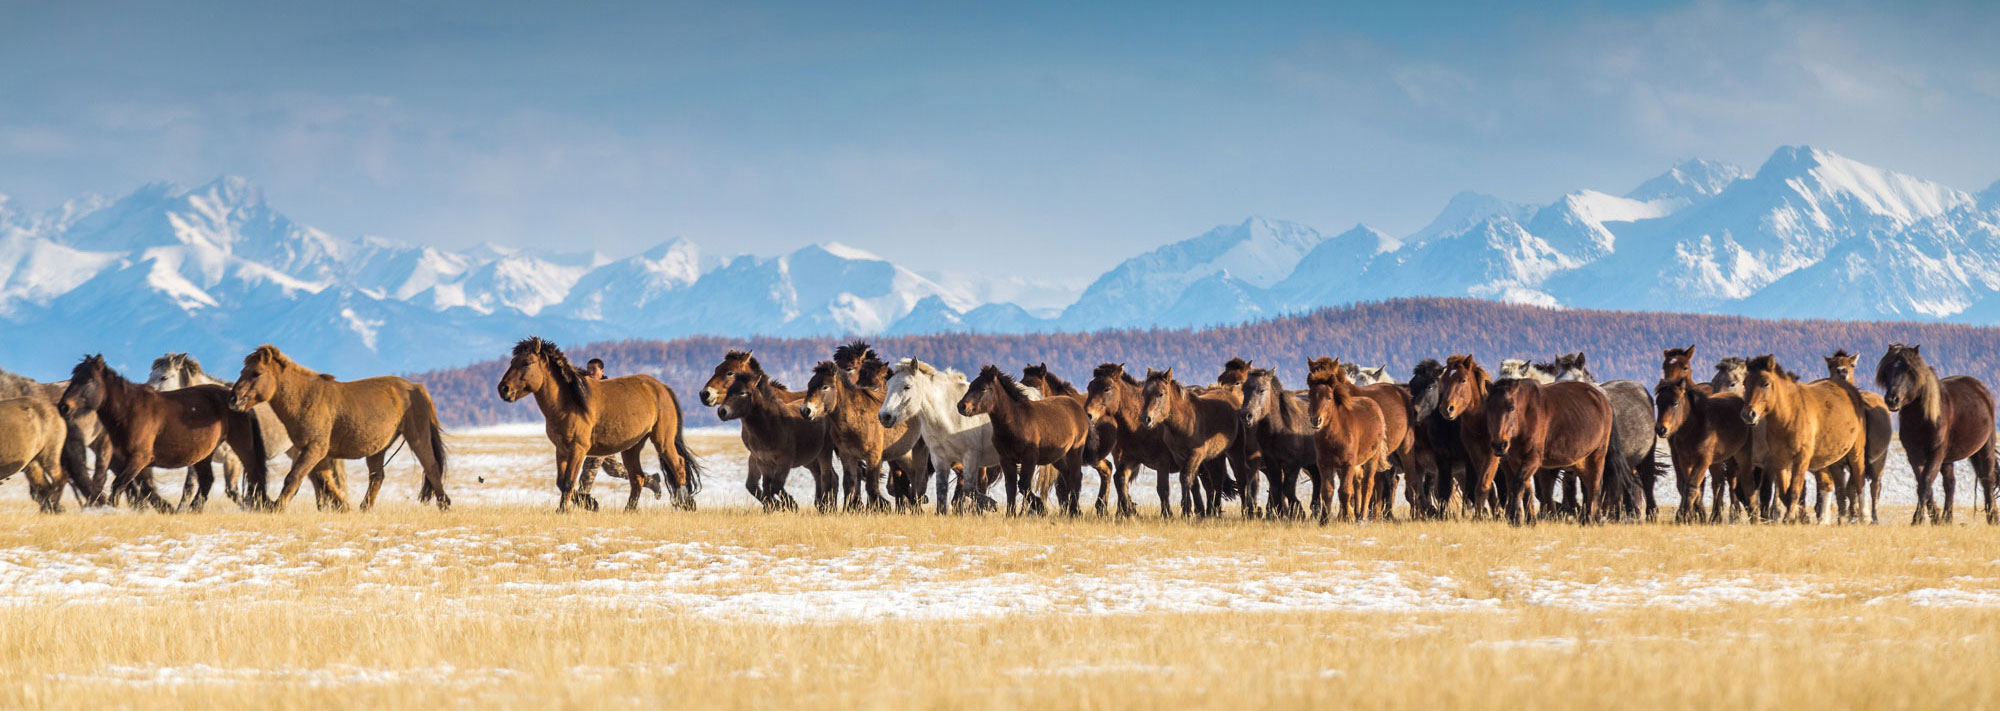 The Mongolia tour to explore vast and varied landscapes